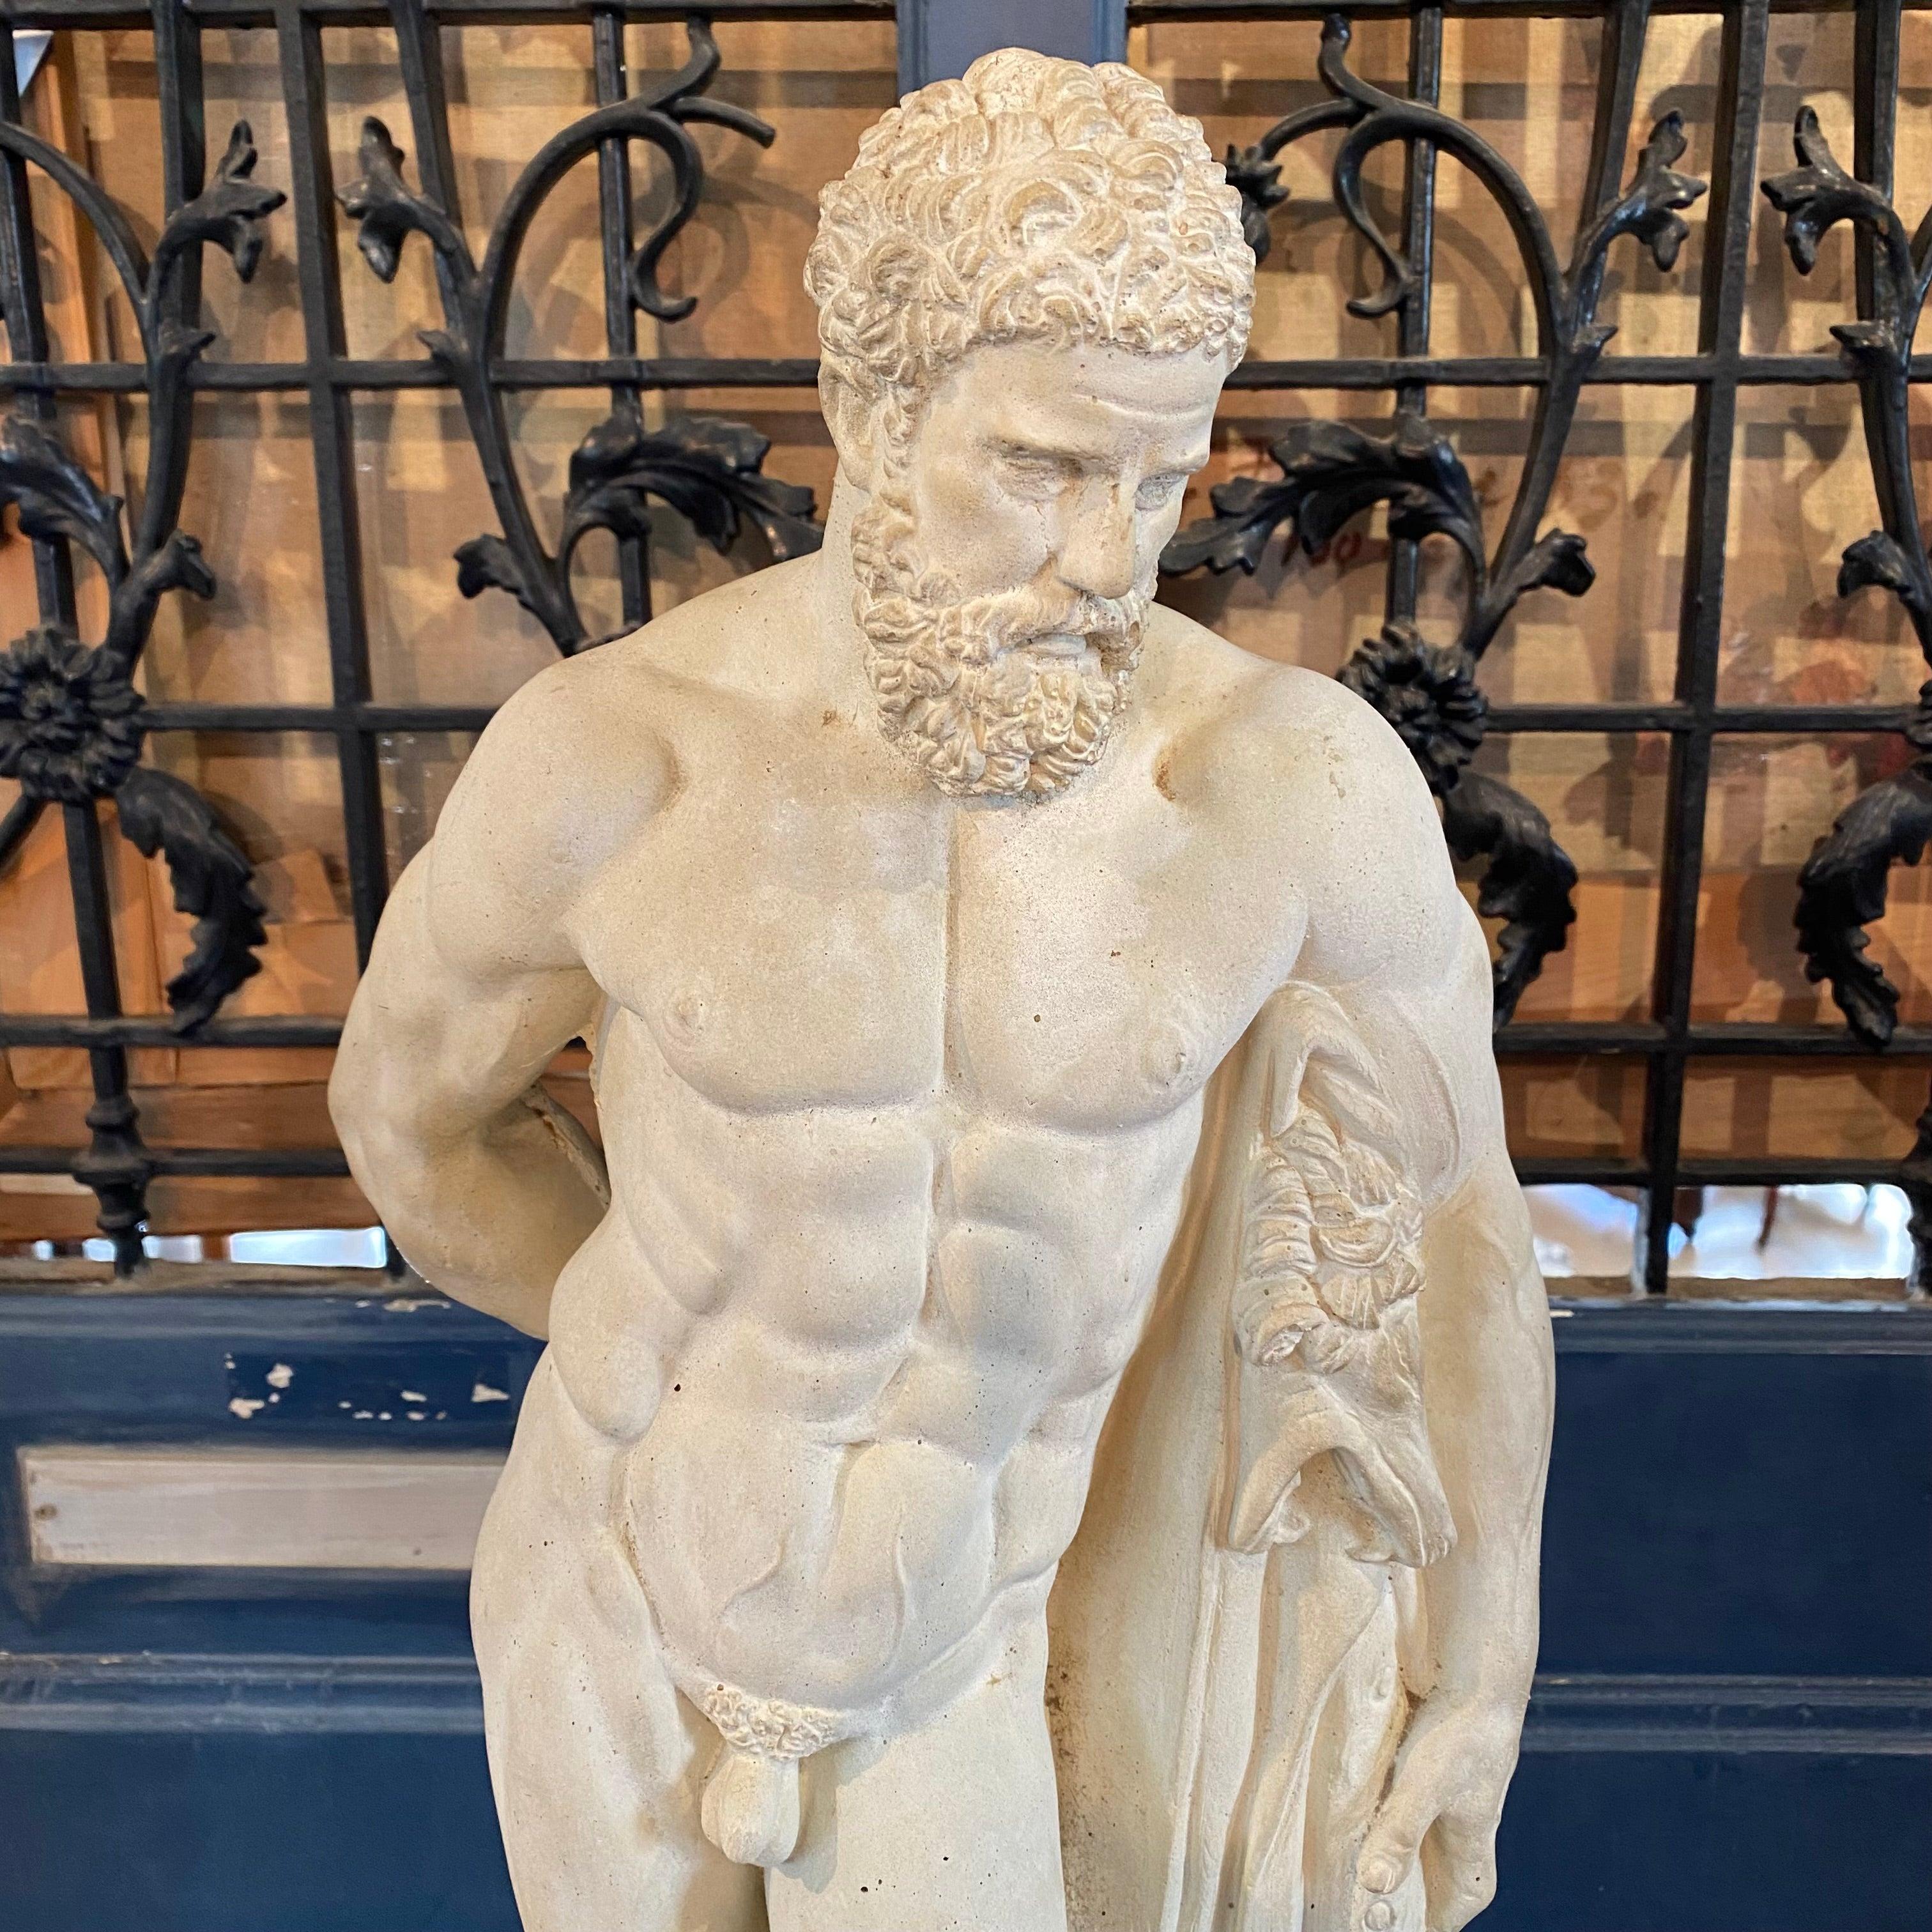 19th Century Sensual Realistic French Sculpture of Male Nude Mythological Figure Hercules For Sale